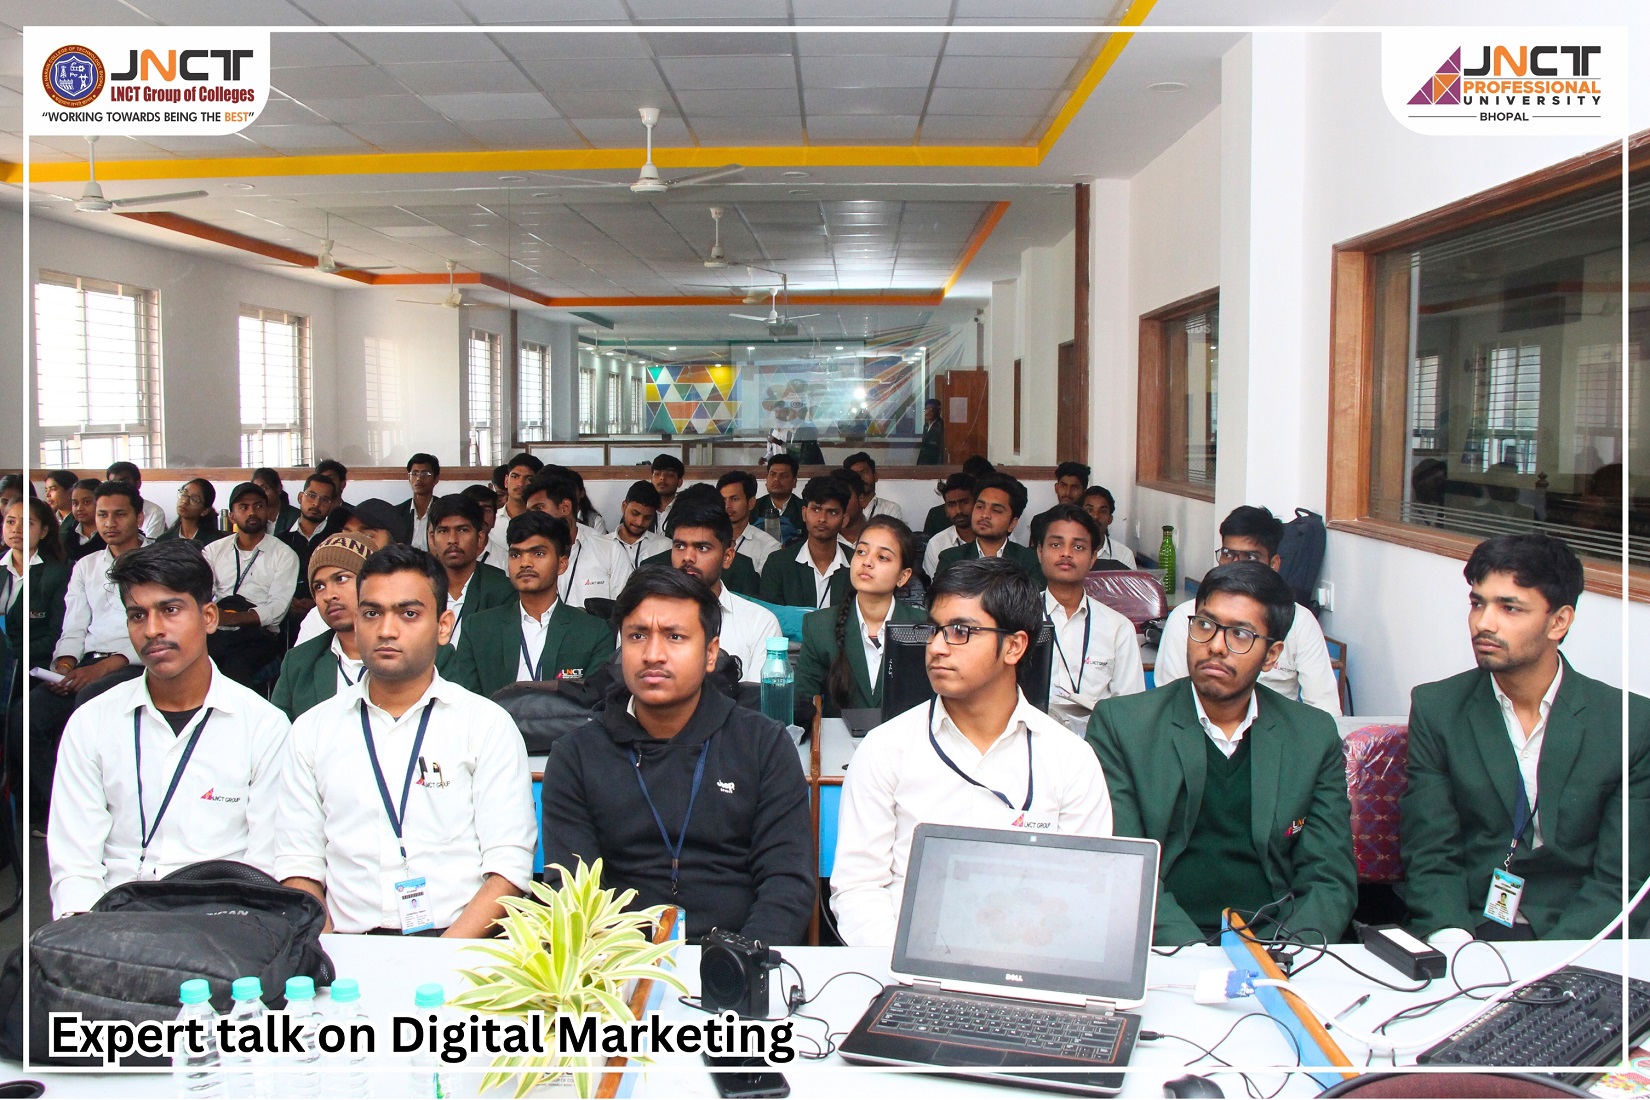 Digital Marketing featuring the esteemed expert, Mr. Sanjay Agrawal, a master trainer for MSME